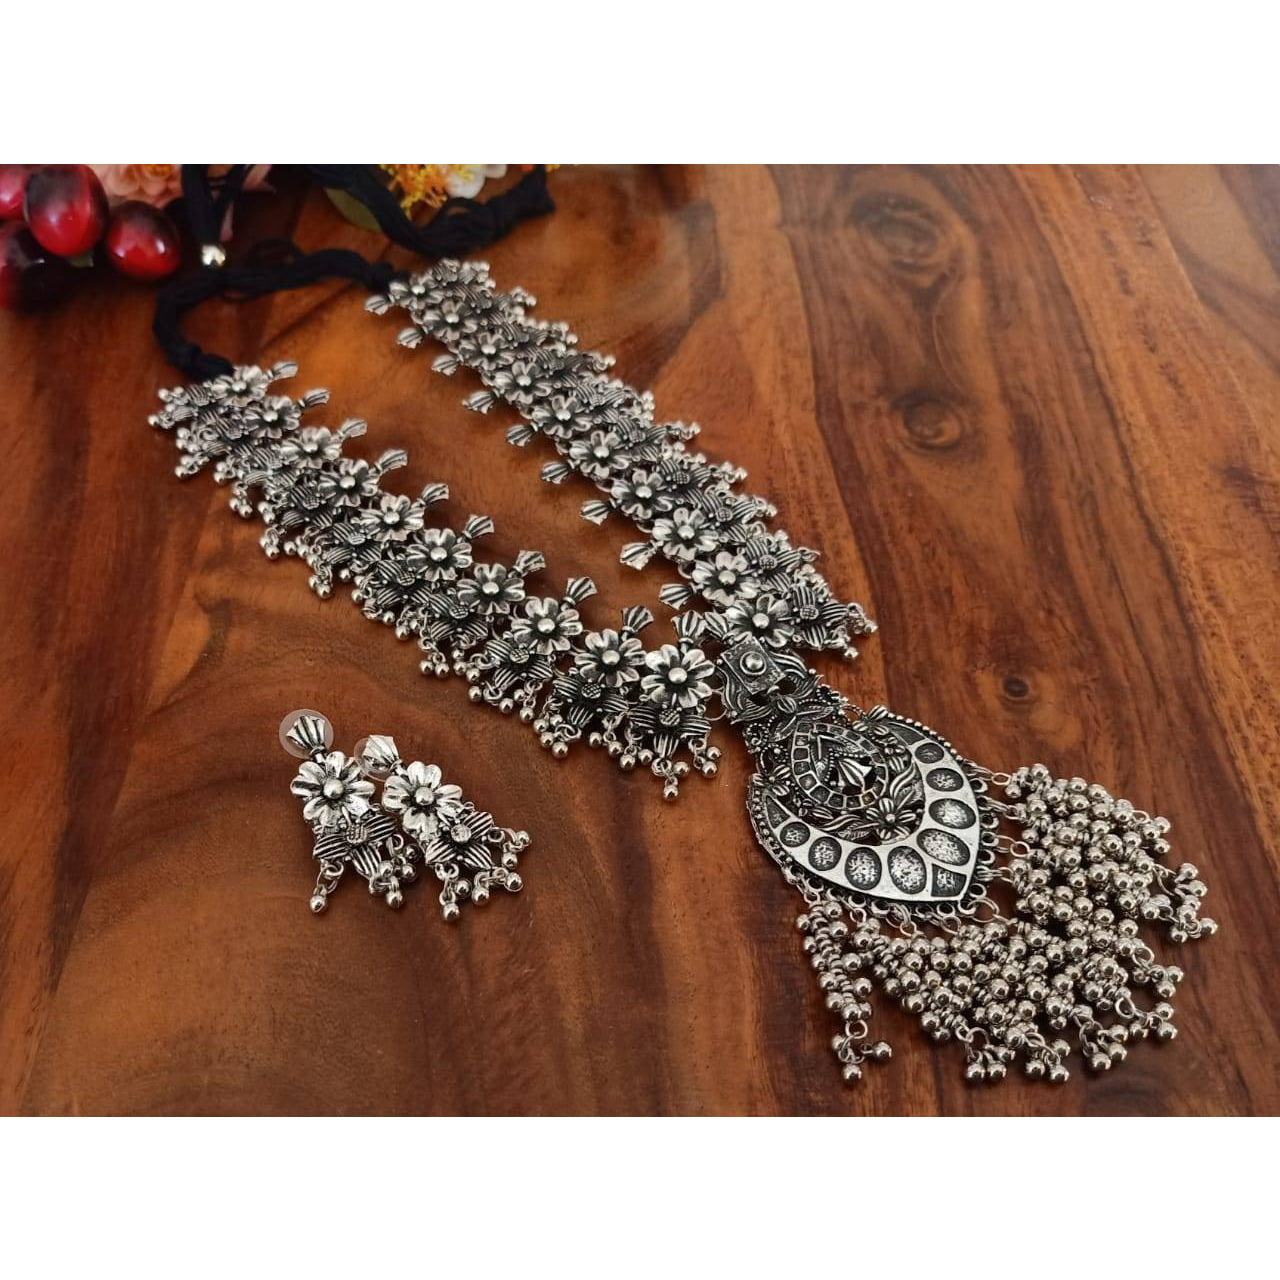 In love with oxidized jewelry? This long necklace with earrings combo is surely going to be anamazing choice. The trendy, elegant and sophisticated Indian Jewelry is ideal for casual occasions aswell as parties. Its Victorian design is absolutely eye-catching and is surely going to be a head-turner.You can also pair this with Indian and western outfits or purely ethnic dresses and win complimentslike never before.Jewelry care tips??????? Oxidized silver jewelry should not be exposed to sweat or